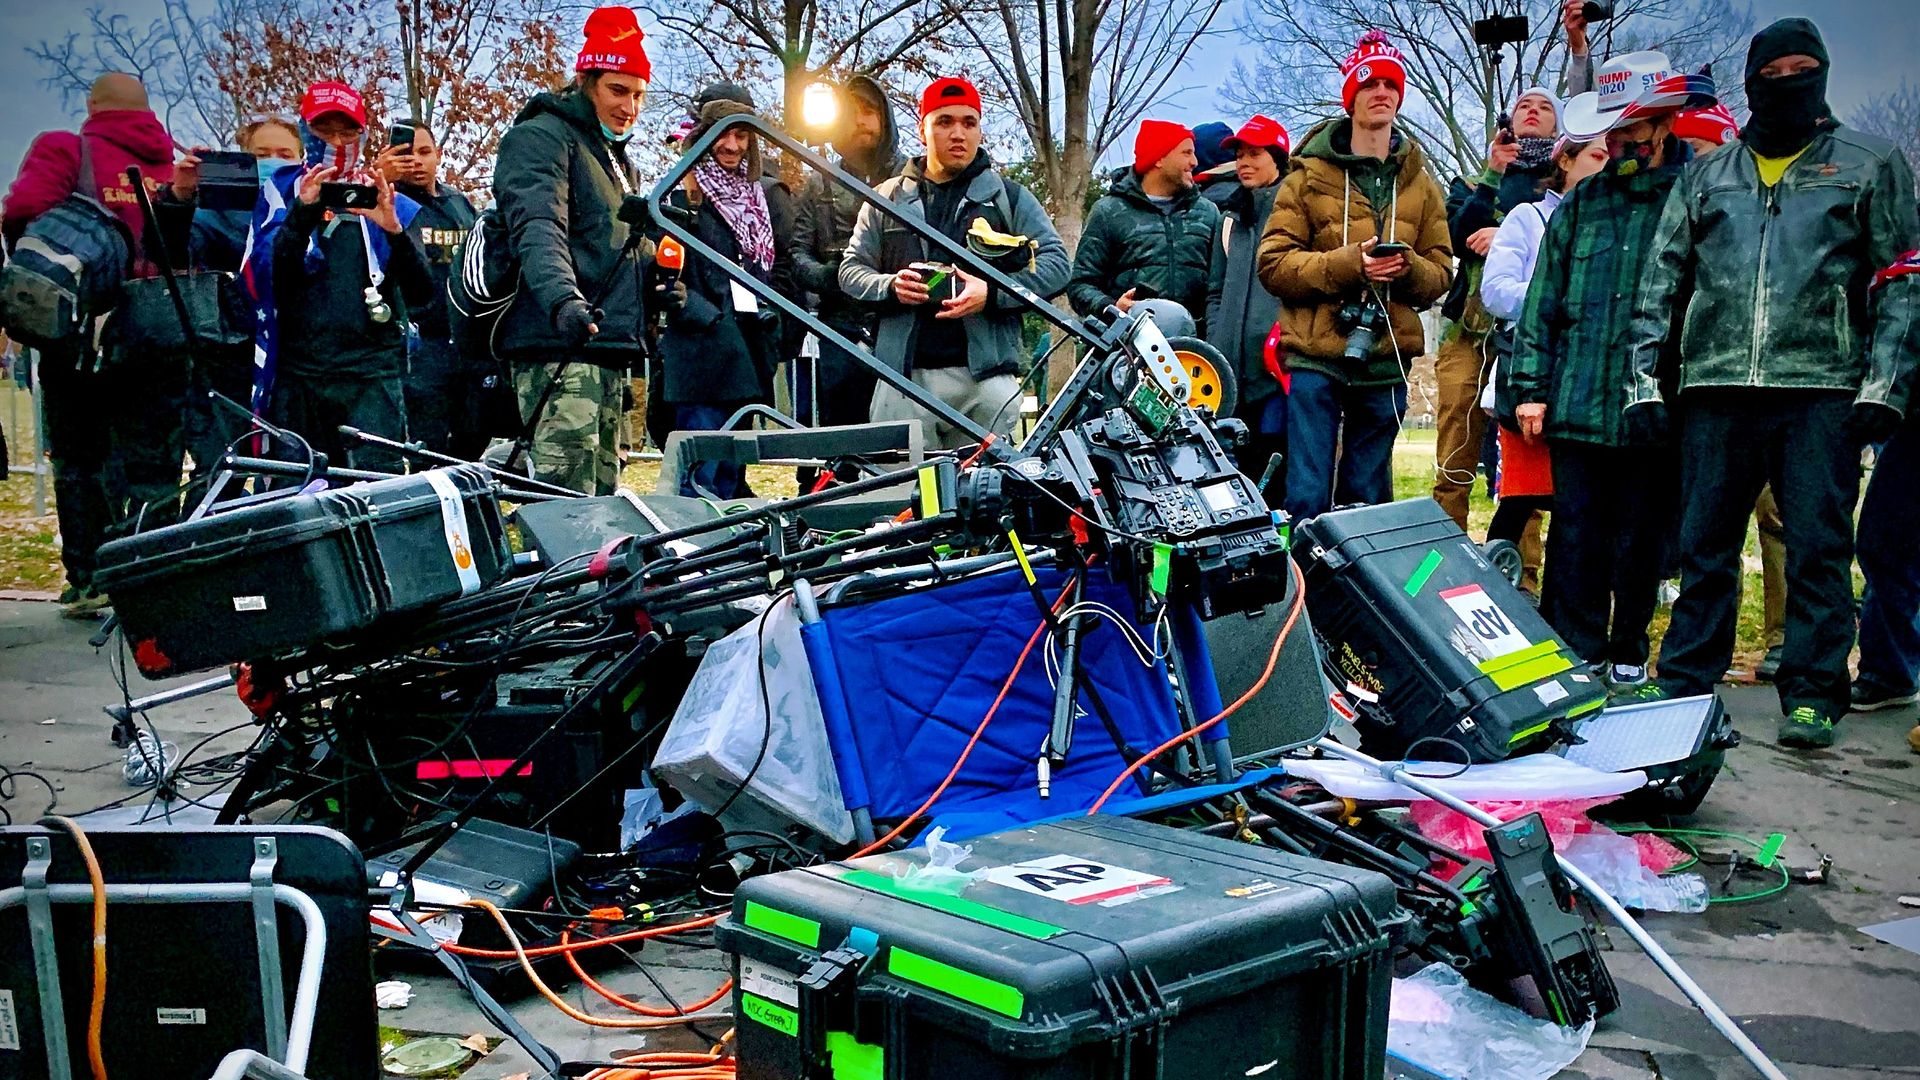 Supporters of US President Donald Trump stand next to media equipment they destroyed during a protest on January 6, 2021 outside the Capitol in Washington, DC.